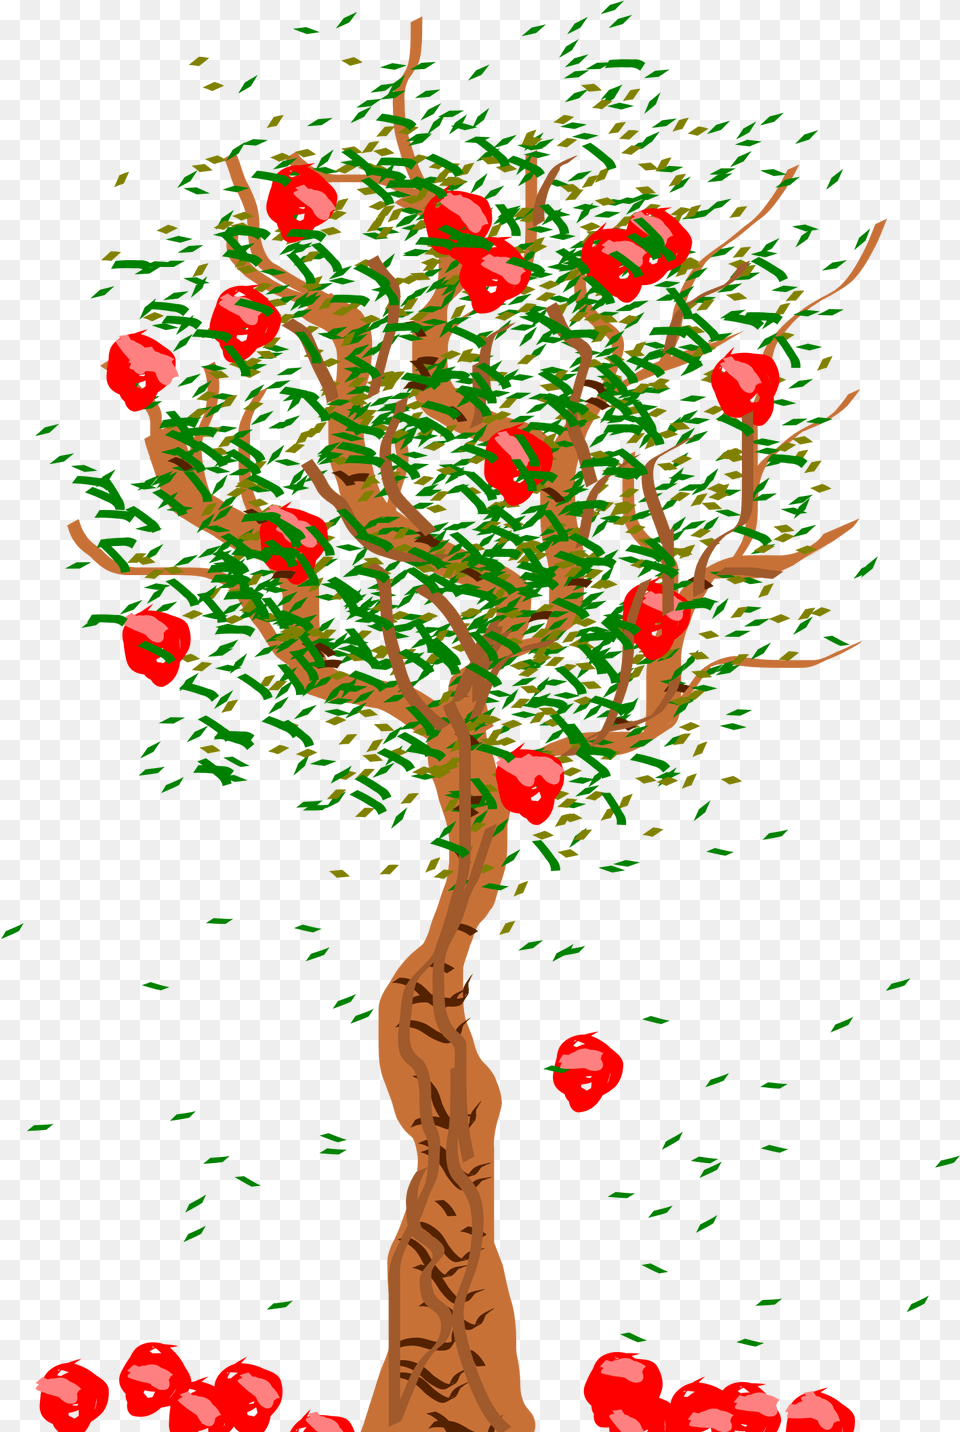 Library Of Free Jpg Apple Tree Files Clipart Art 2019 Apple Falling From Trees, Graphics, Flower, Plant, Painting Png